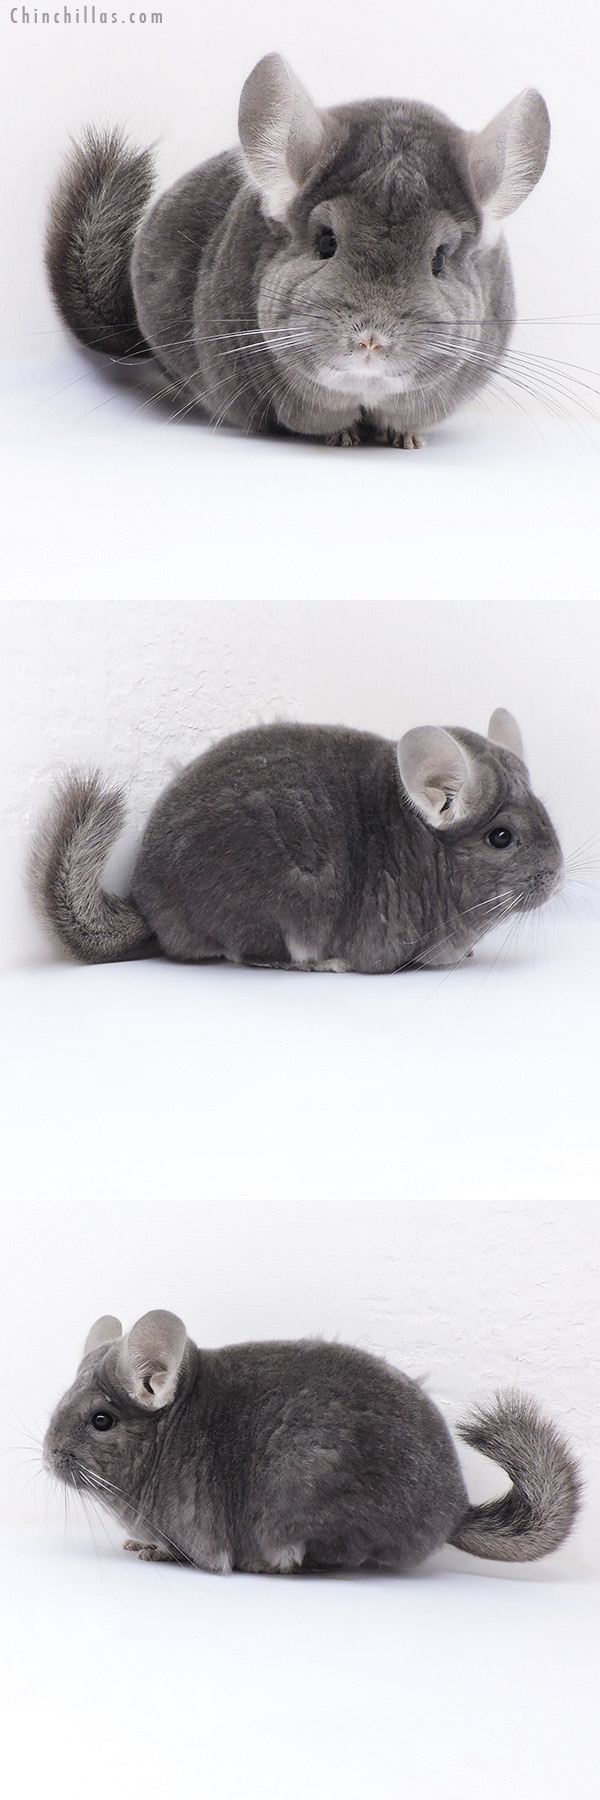 Chinchilla or related item offered for sale or export on Chinchillas.com - 17381 Extra Large Blocky Premium Production Quality Violet ( Ebony Carrier ) Female Chinchilla